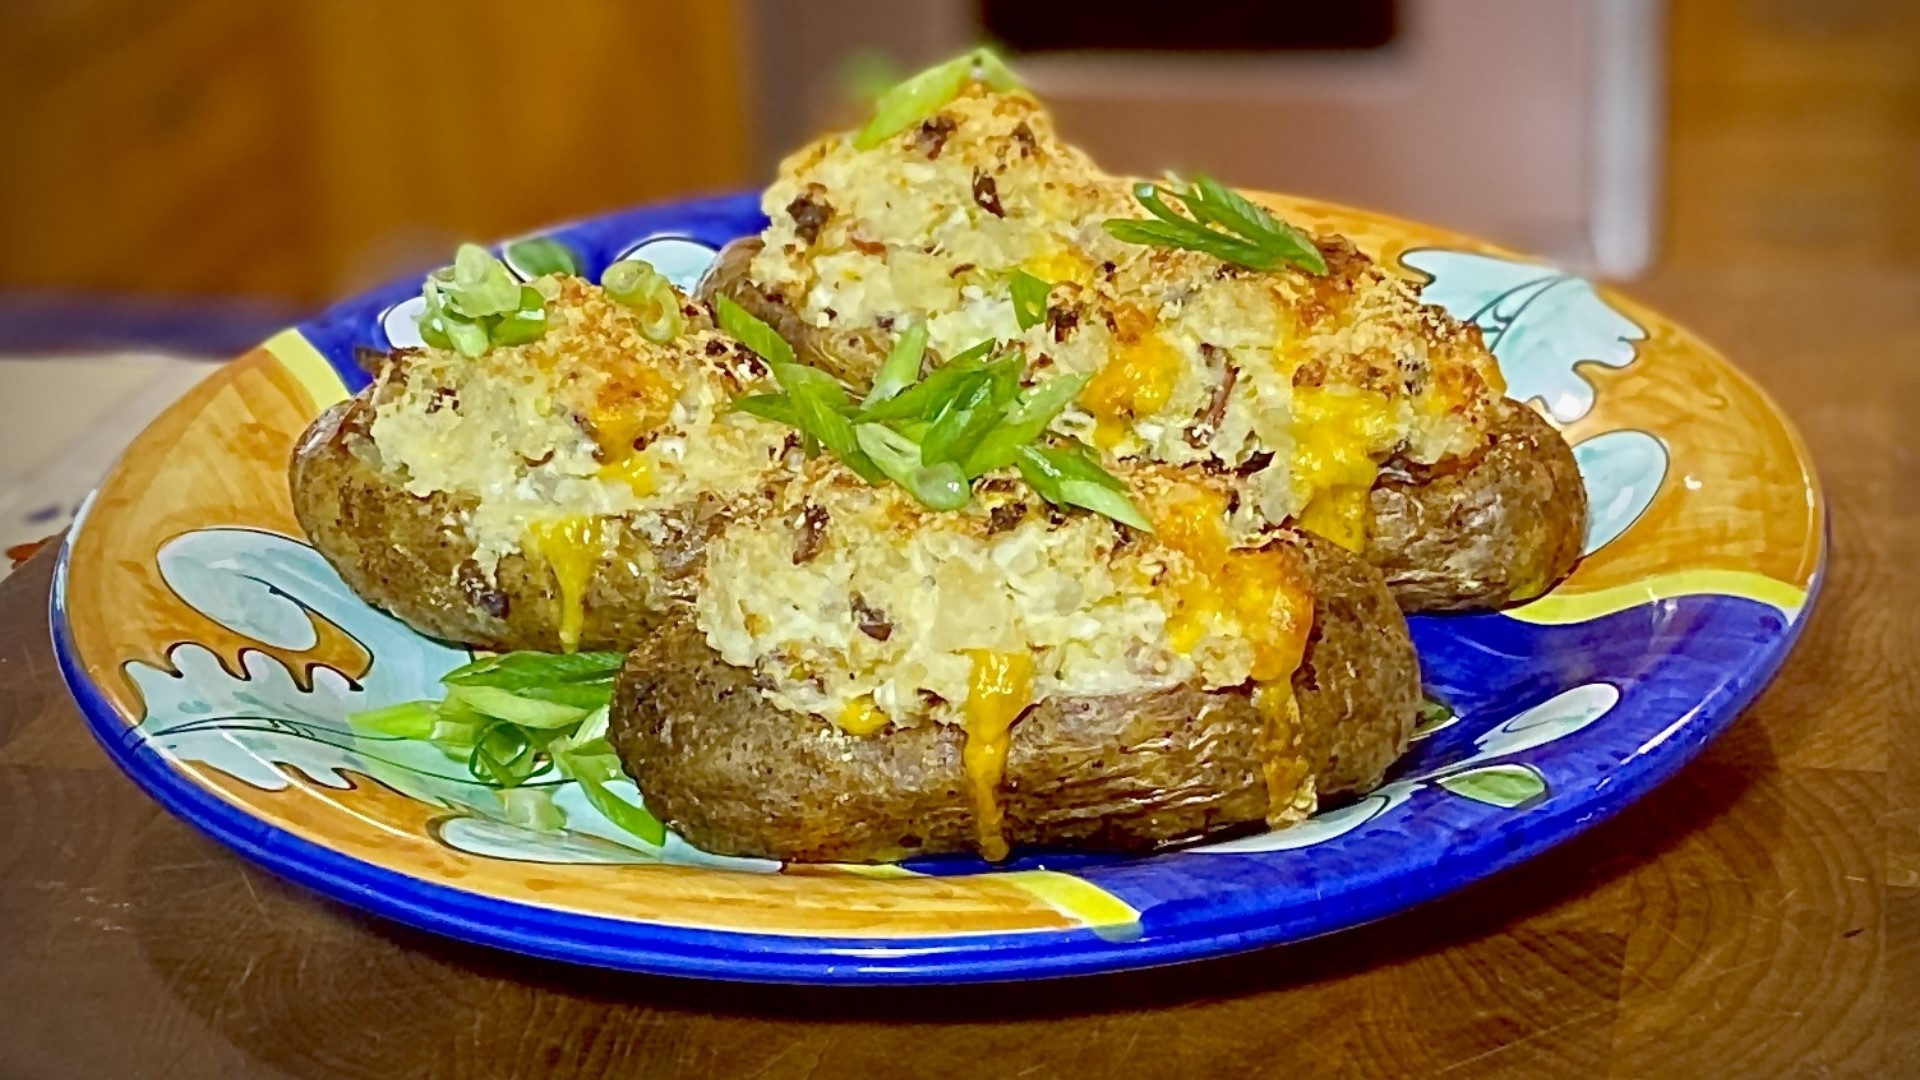 These twice-baked potatoes remind me so much of my childhood.